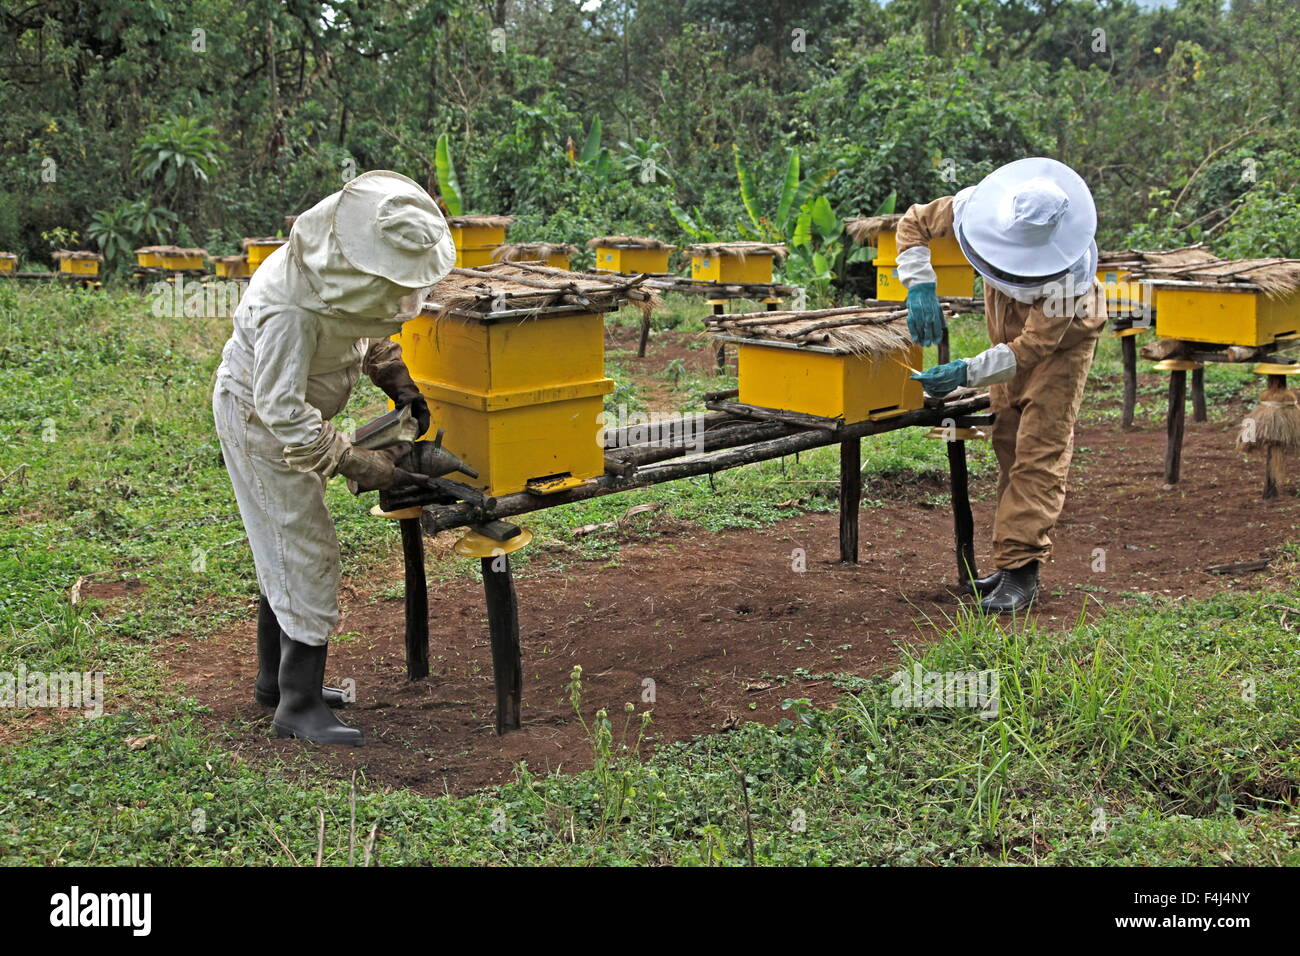 Farmers working in a honey producing co-operative in the Masha area of Ethiopia, Africa Stock Photo